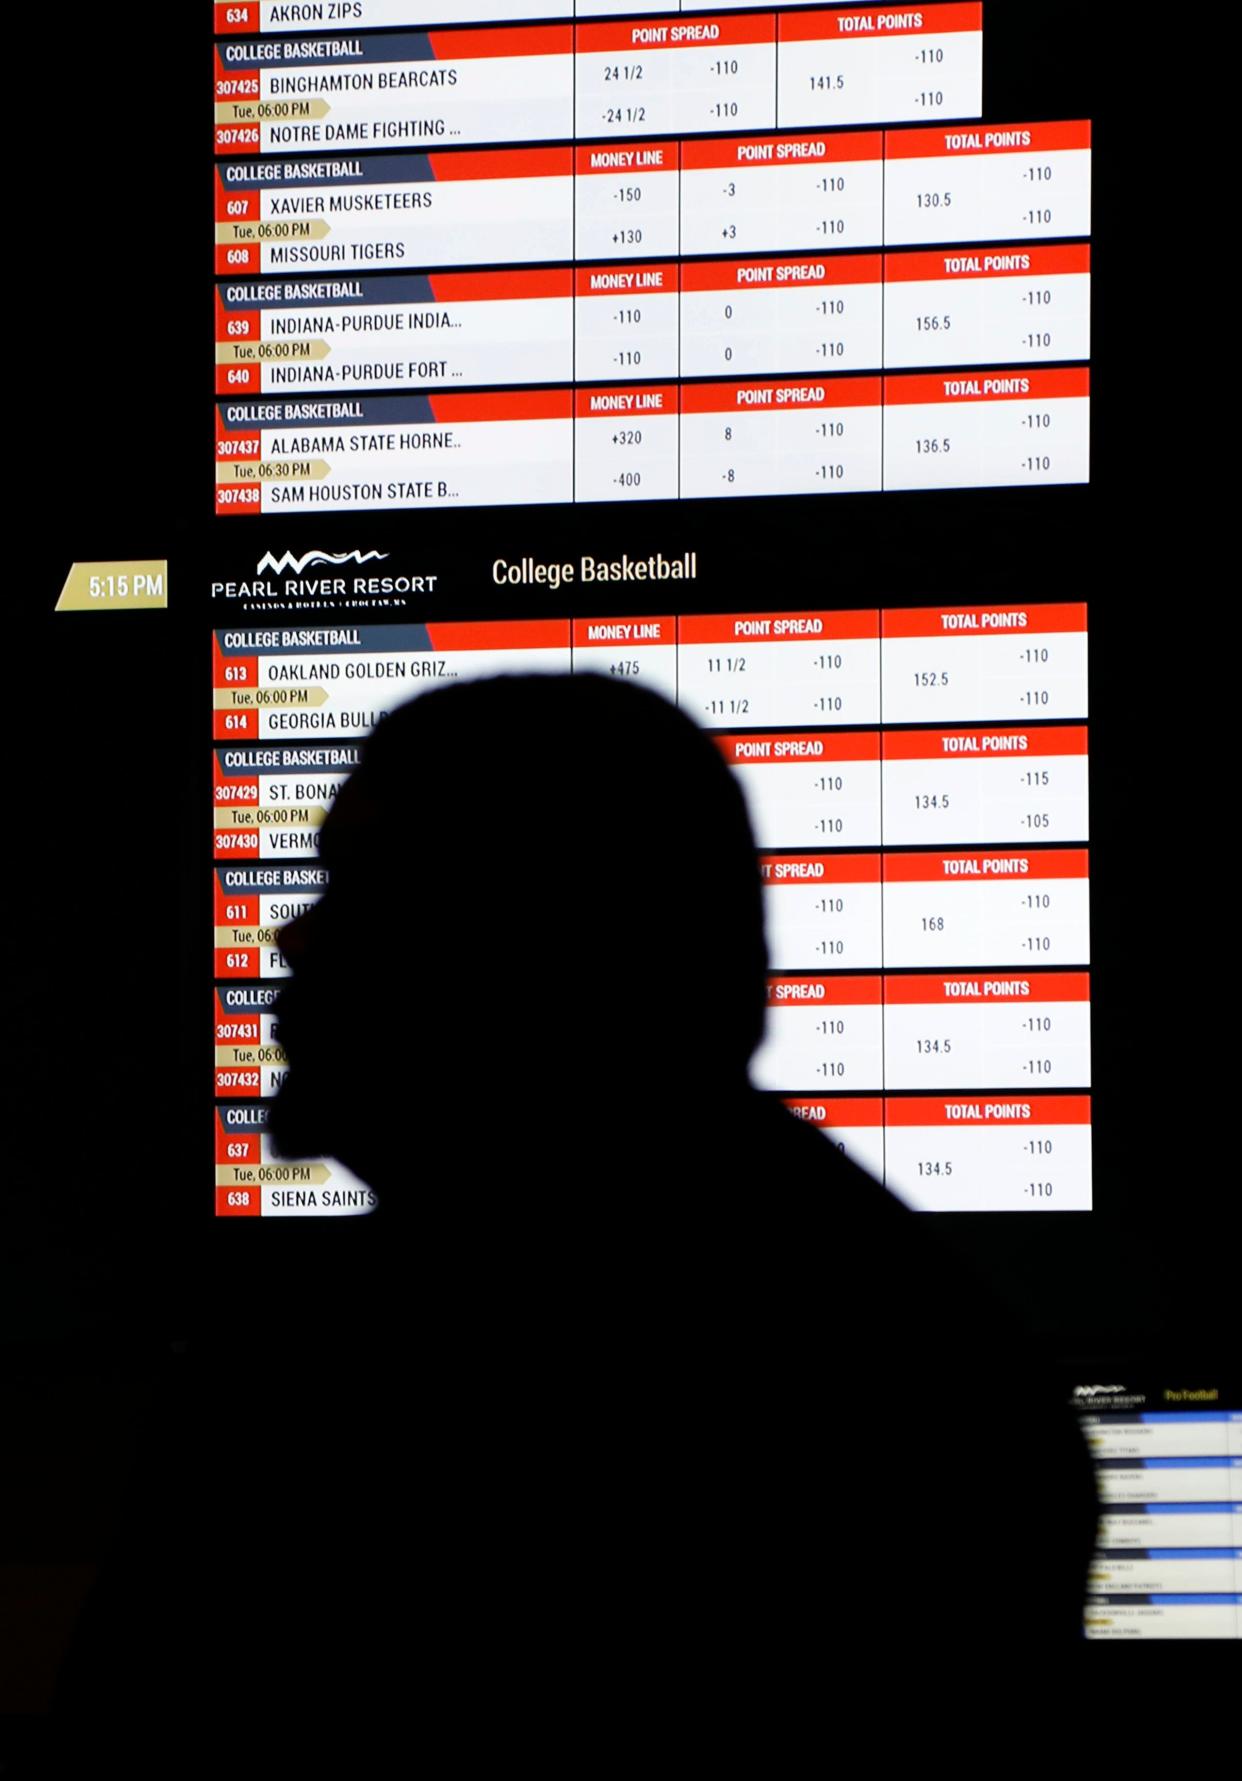 In this Dec. 18, 2018 photo, a person walks by a betting wall at the Pearl River Resort in Philadelphia, Miss. The sports book owned by the Mississippi Band of Choctaw Indians is the first to open on tribal lands outside of Nevada following a U.S. Supreme Court ruling earlier this year, a no-brainer business decision given the sports fans among its gambling clientele.